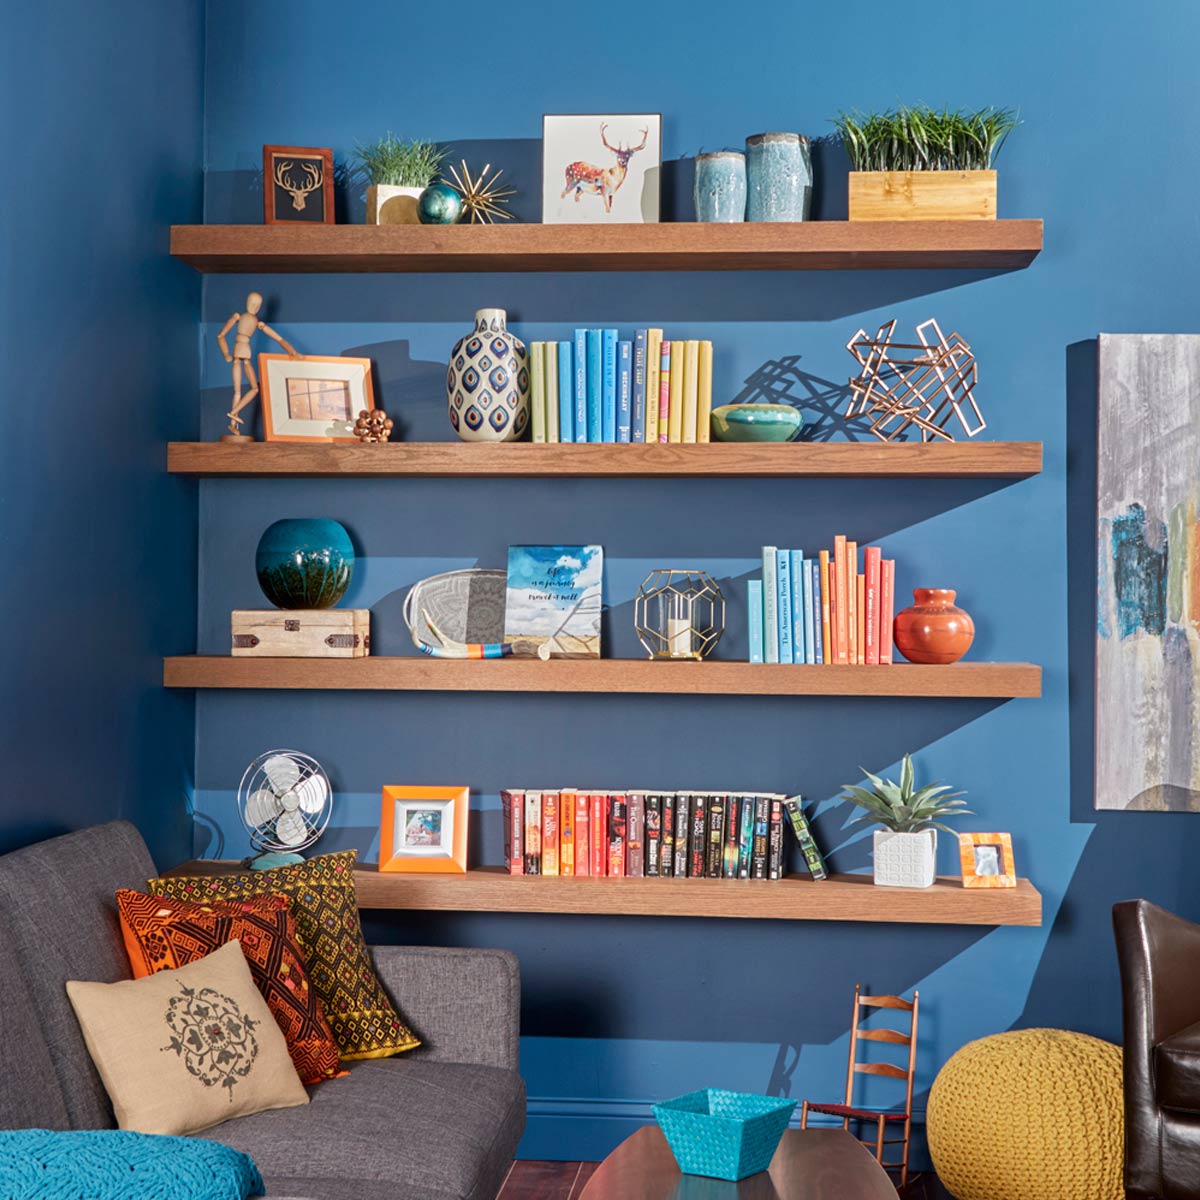 how build floating shelves the family handyman lead your own shoe armoire peel and stick flooring concrete mantel designs small bookshelf wall mount prepac hanging entryway shelf